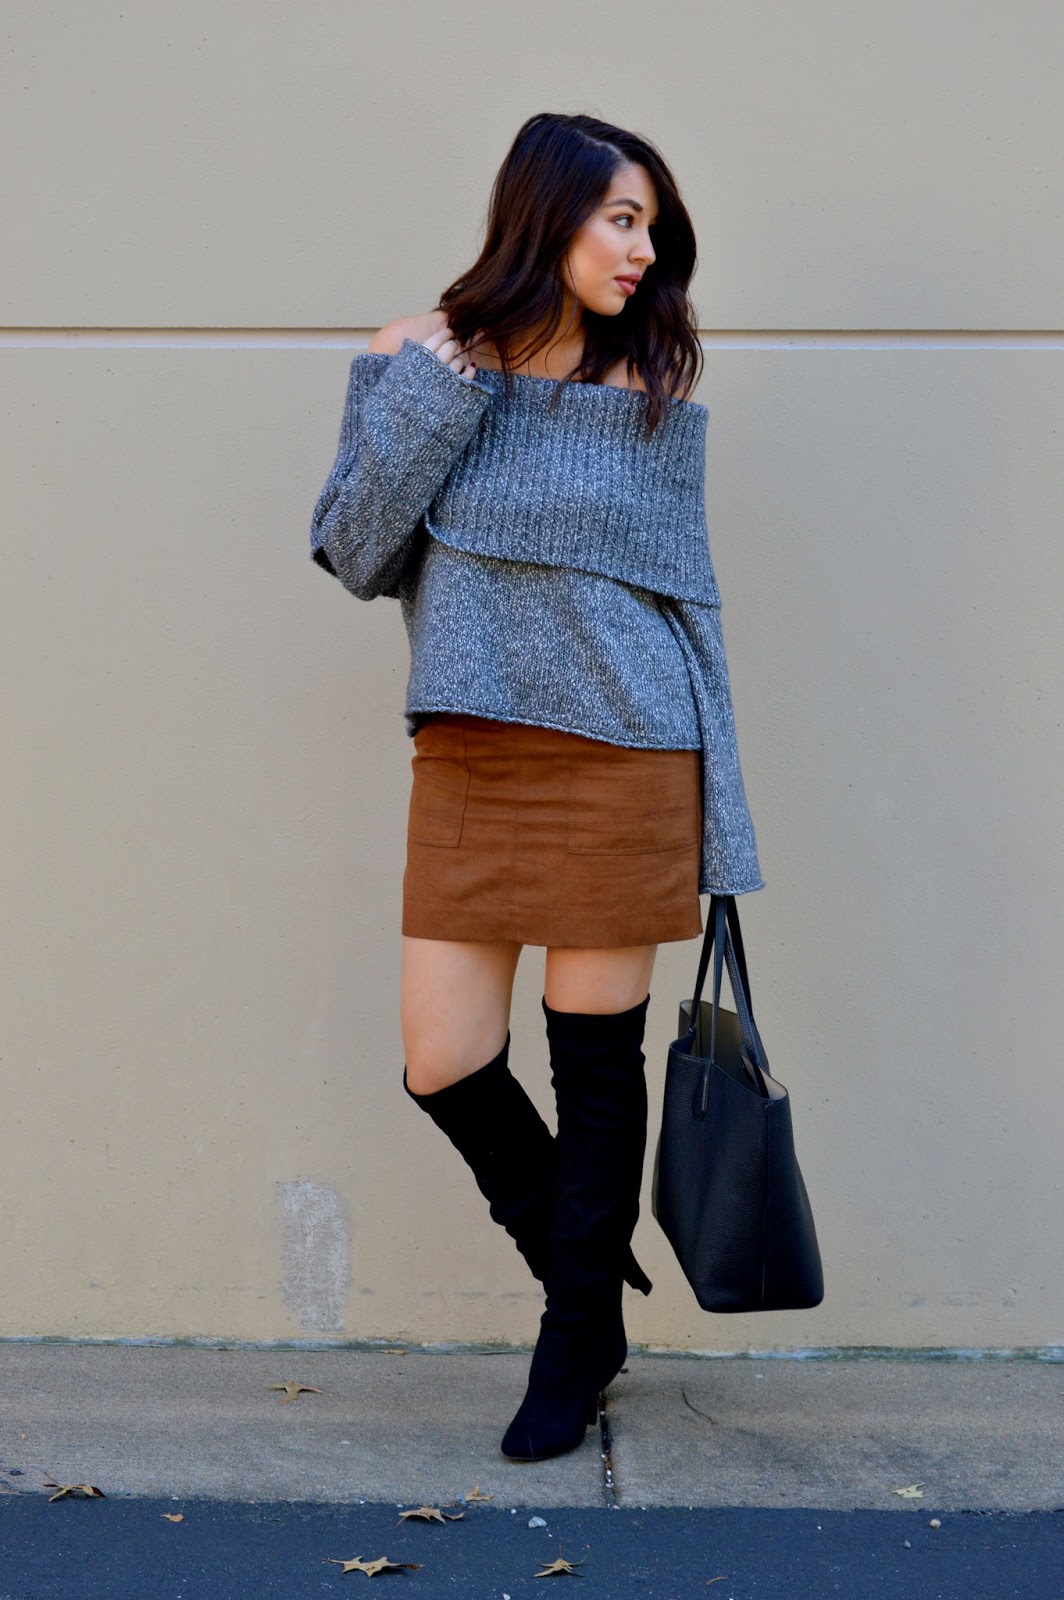 Rosy Outlook: Suede Skirt & OTK Boots + Fashion Frenzy Link-Up!